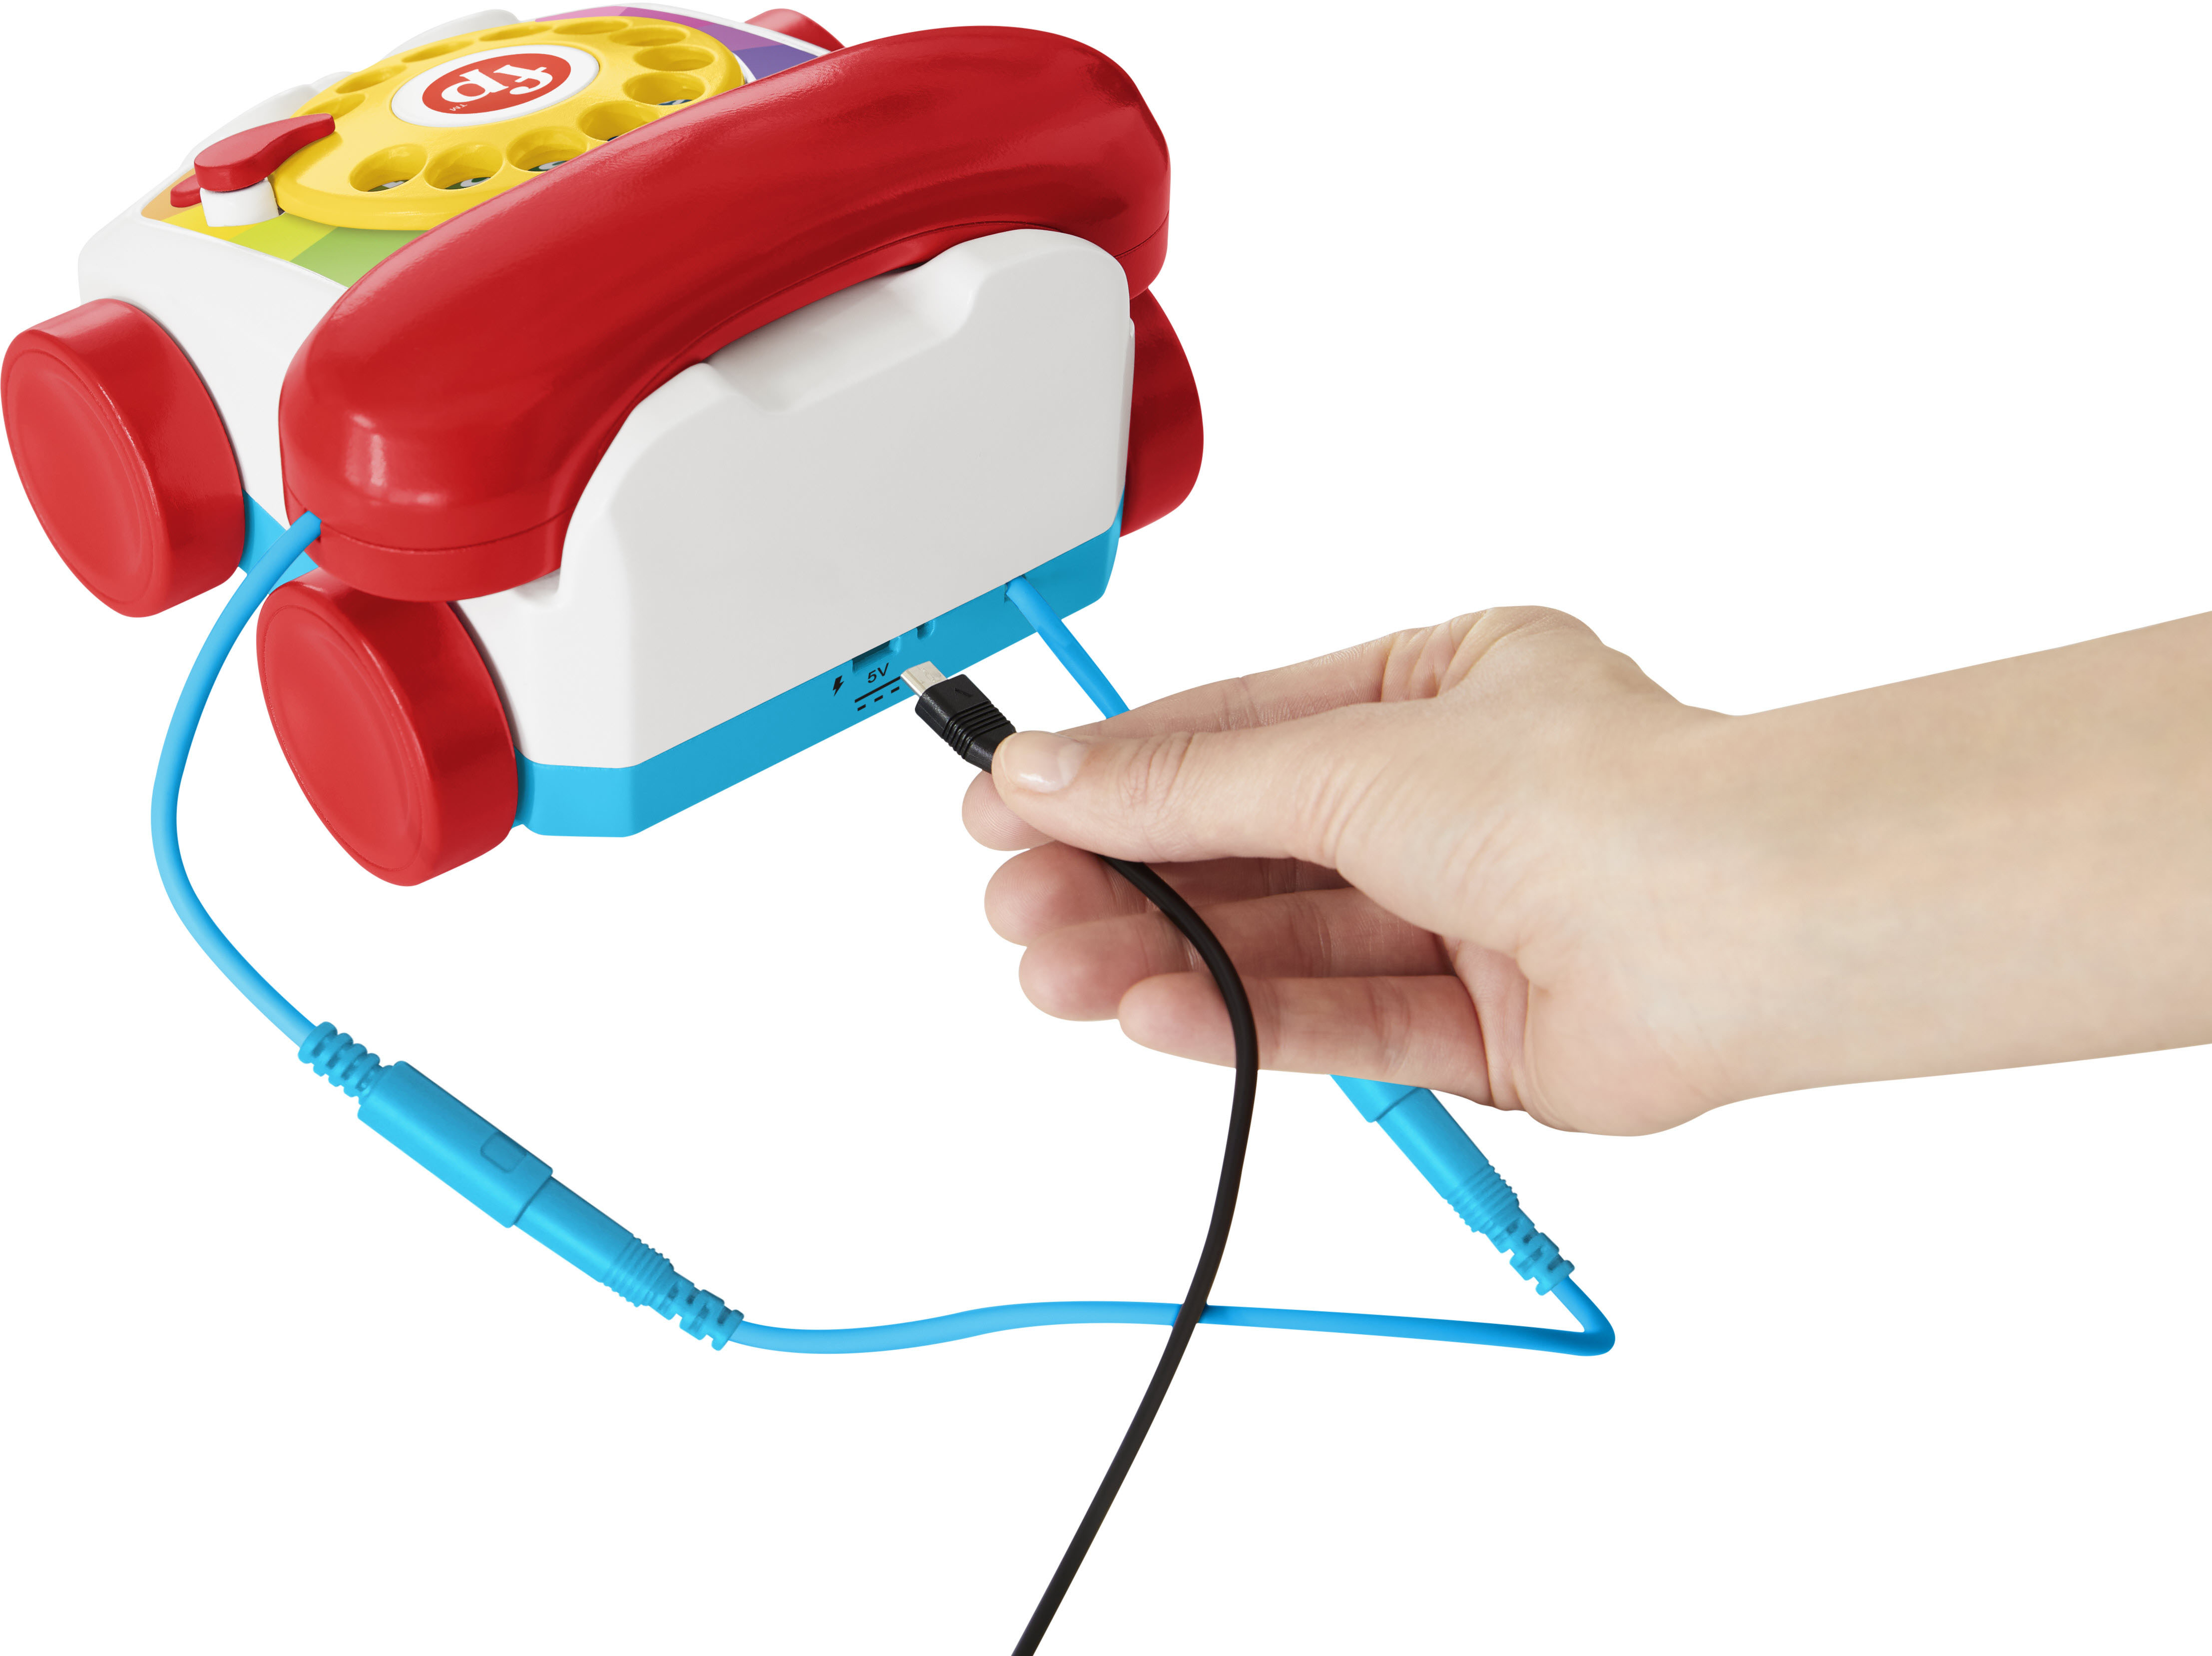 Save on Fisher-Price Chatter Telephone 12+ months Order Online Delivery